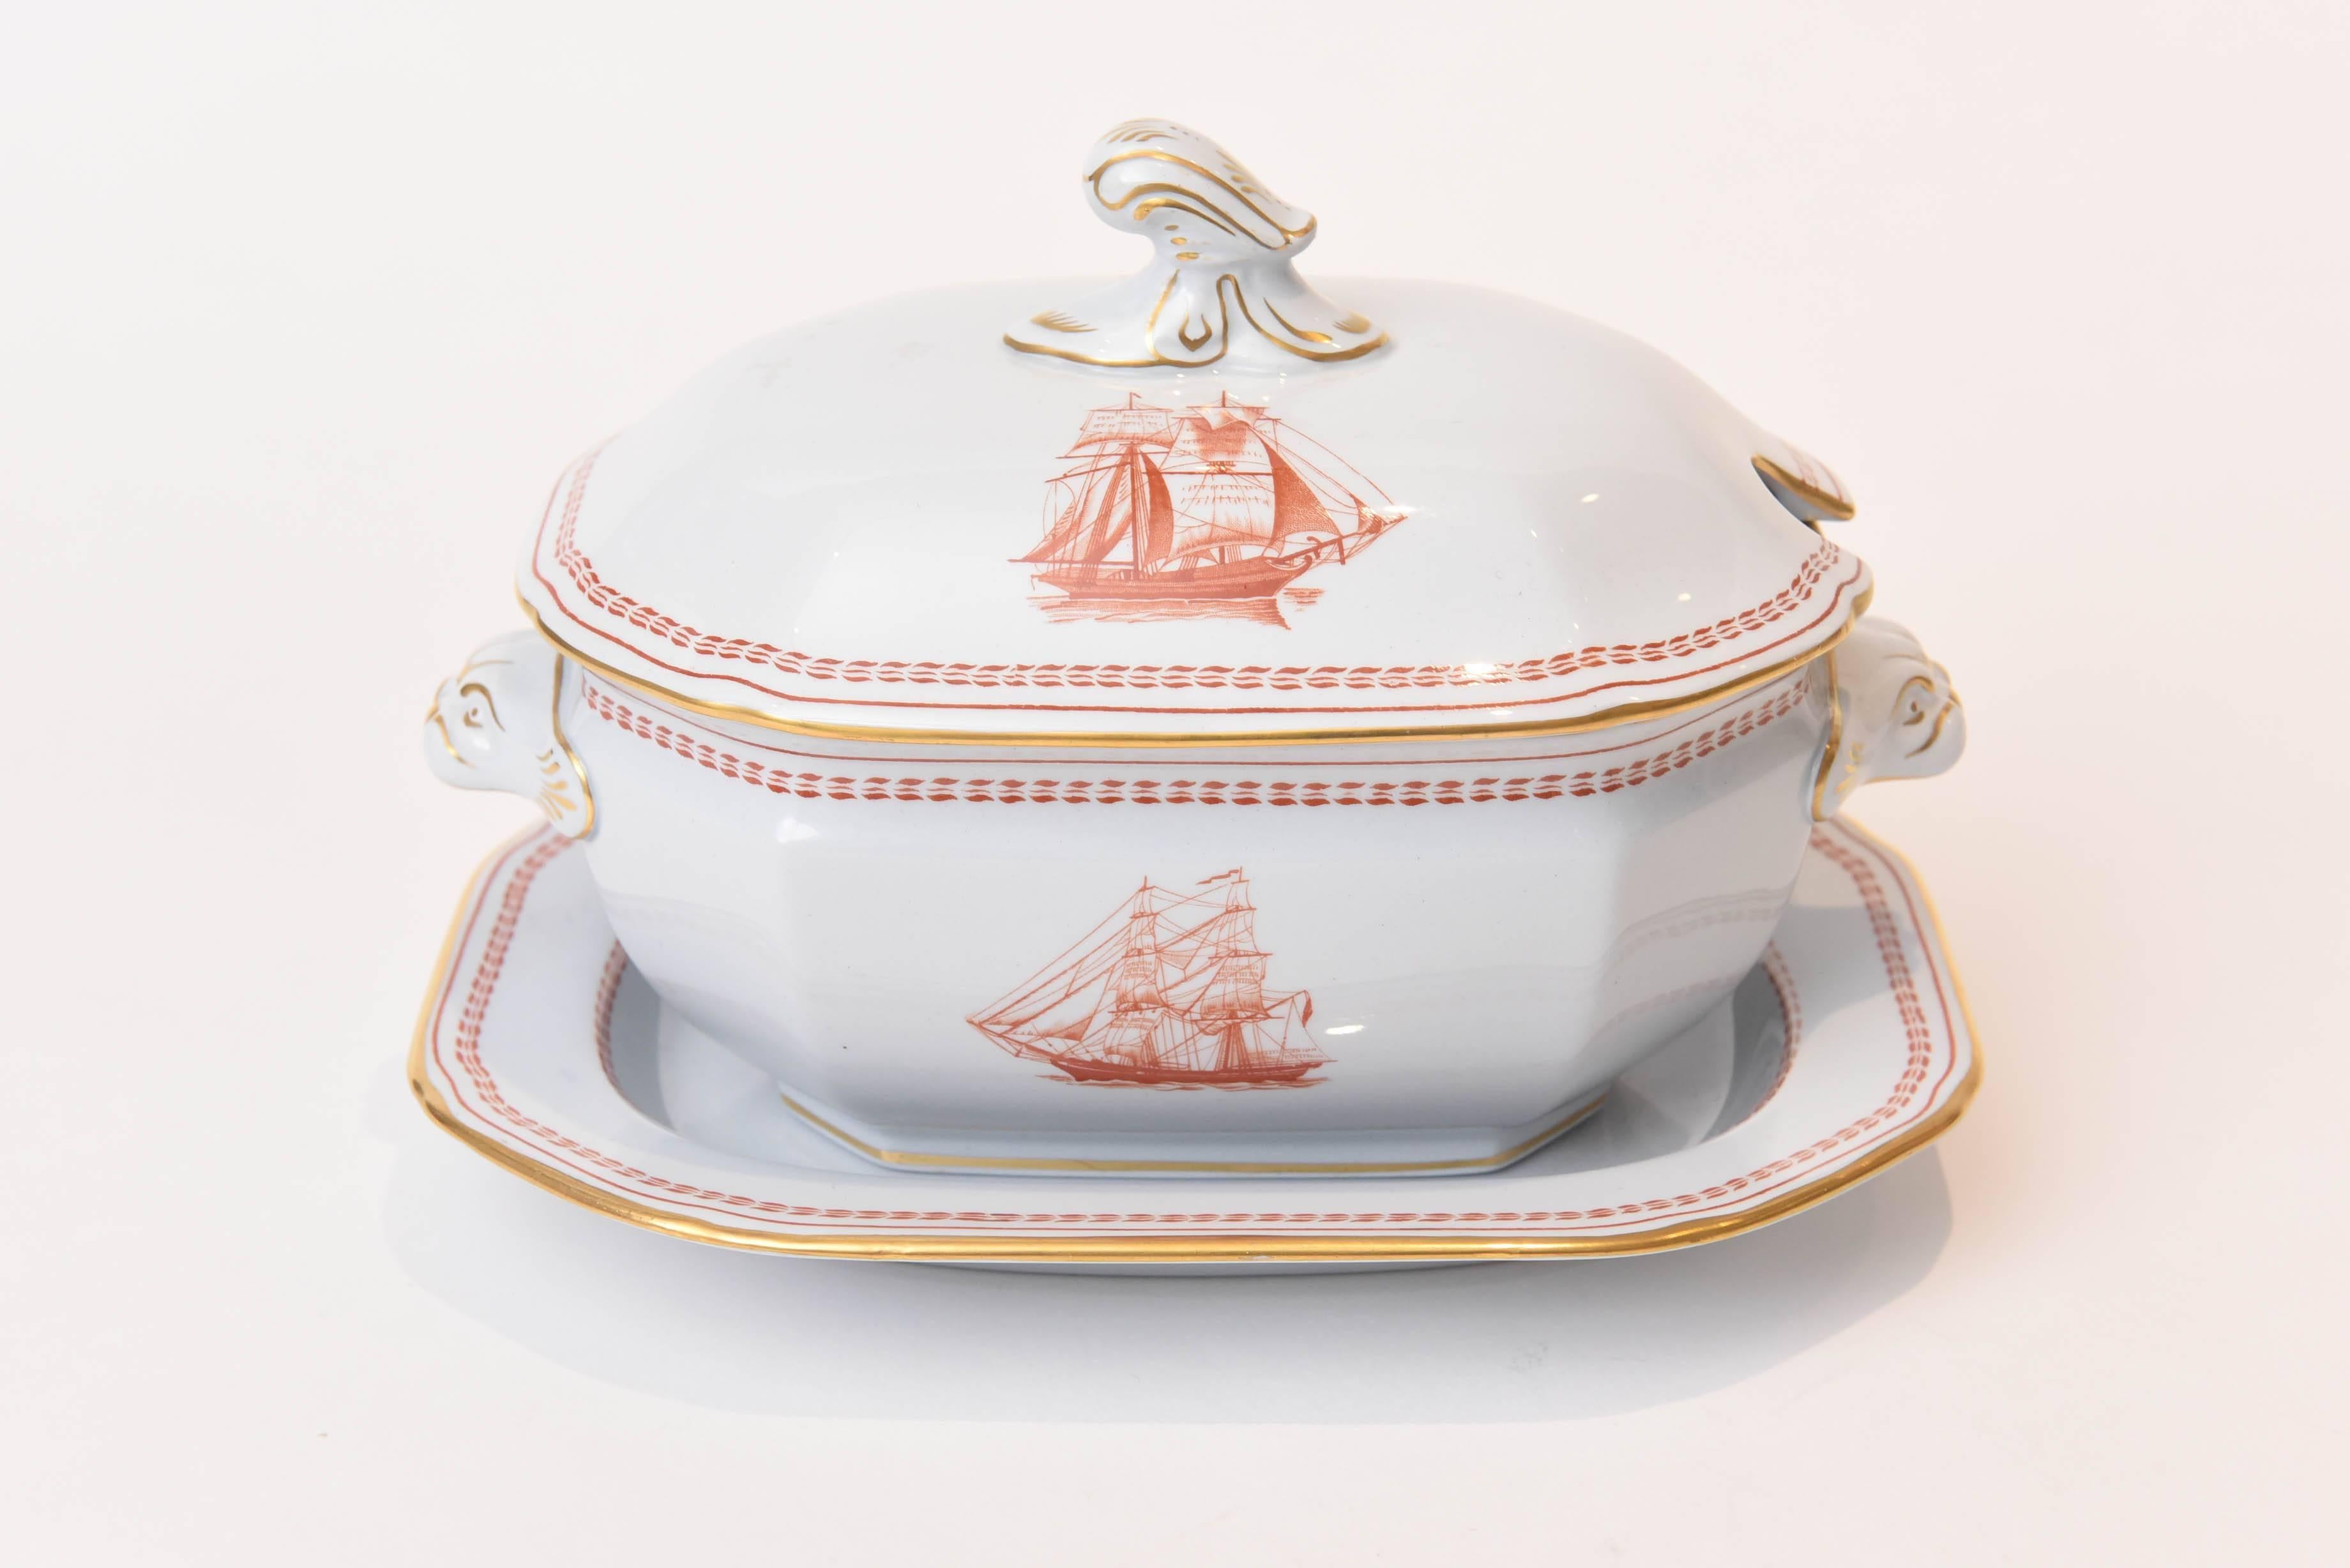 One of Spode England's classic patterns featuring a blue/grey porcelain ground with a Chinese Export styling of foo dog handles and red rope trim. Classic clipper ships are transferred on in great detail. This is the sauce boat size but would also